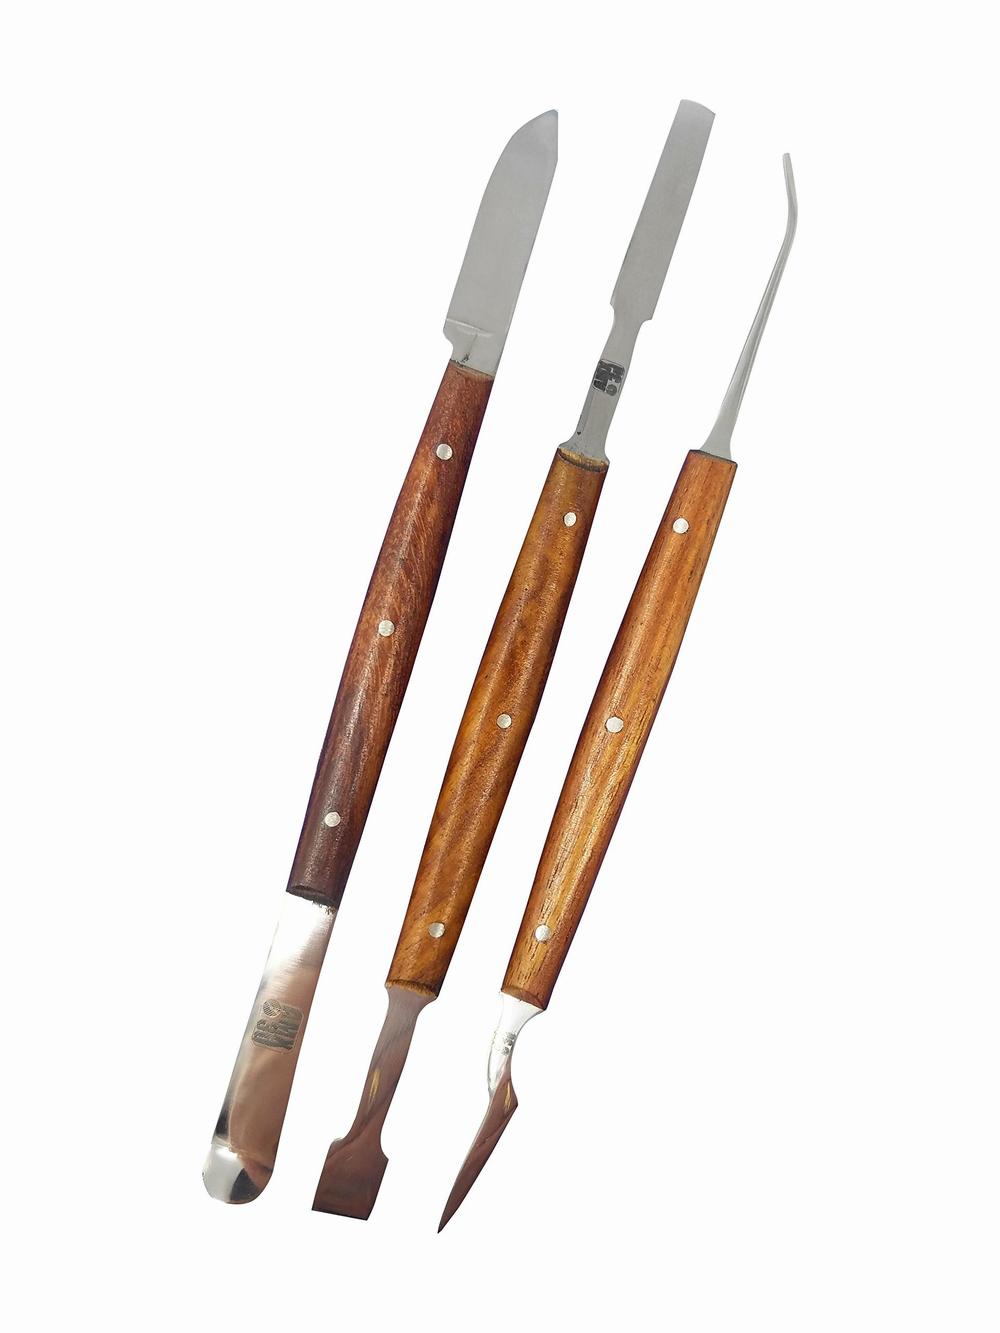 Three metal dental tools with wooden handles.